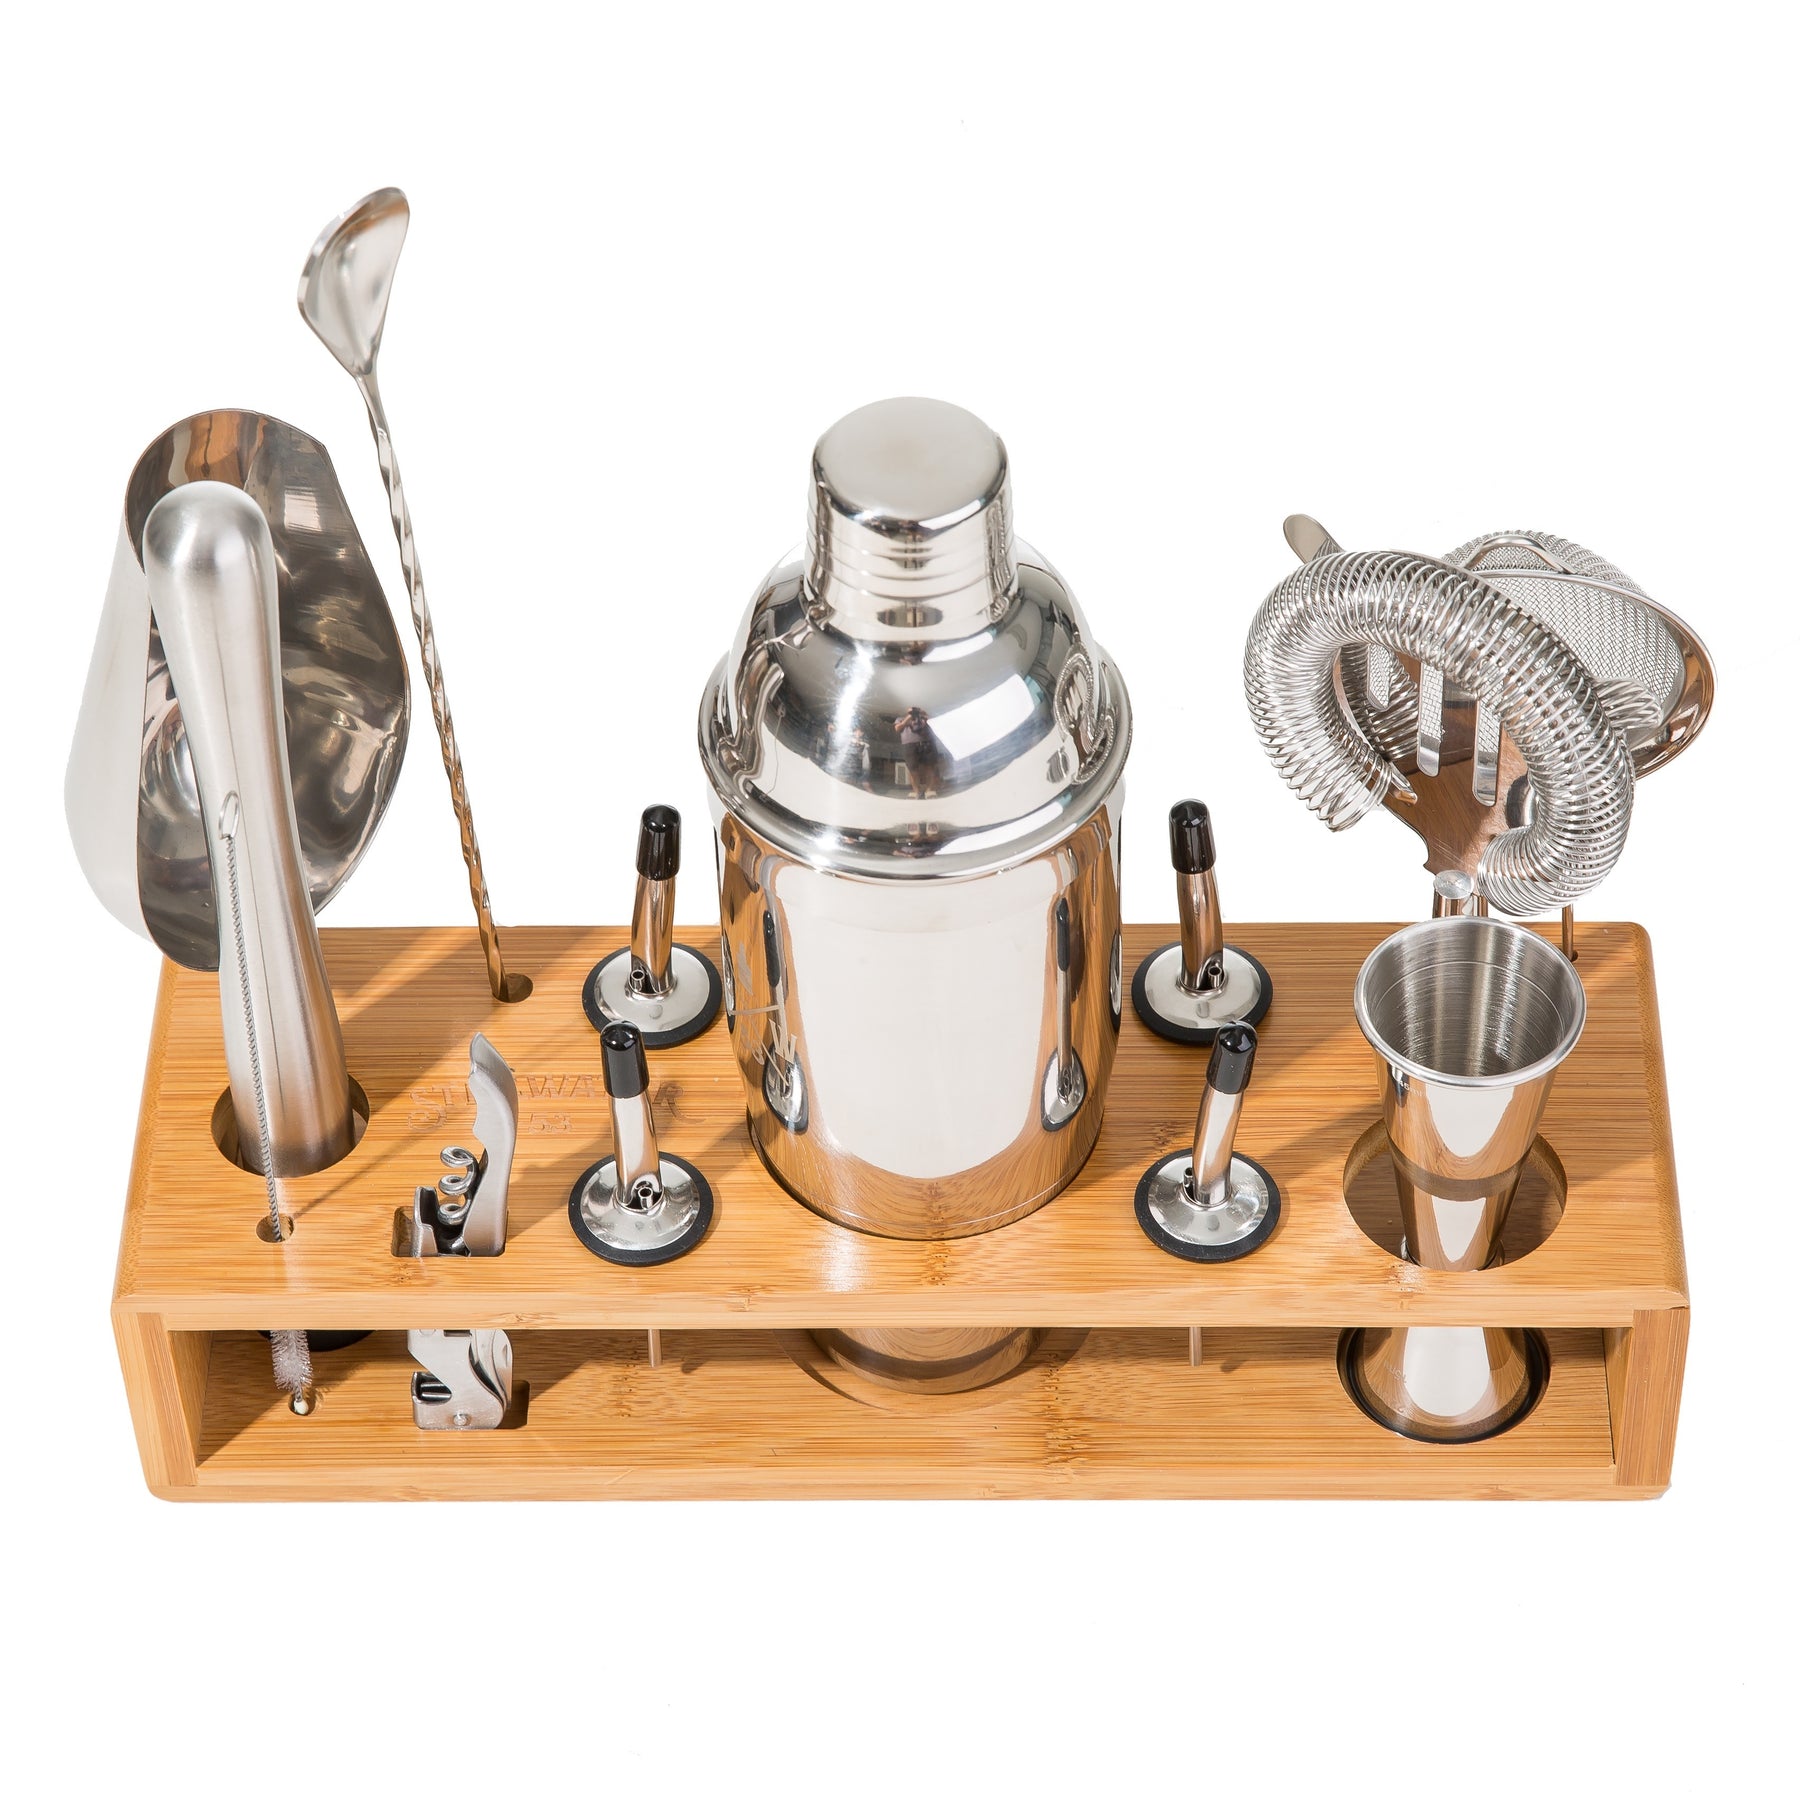  Cocktail Shaker Set with Stand Mixology Bartender KitBar Tool  for Drink Mixing, Cocktail Shaker Bar Accessories for Home Bar Set, Perfect  for Apartment Essentials and House Warming Gifts New Home: Home